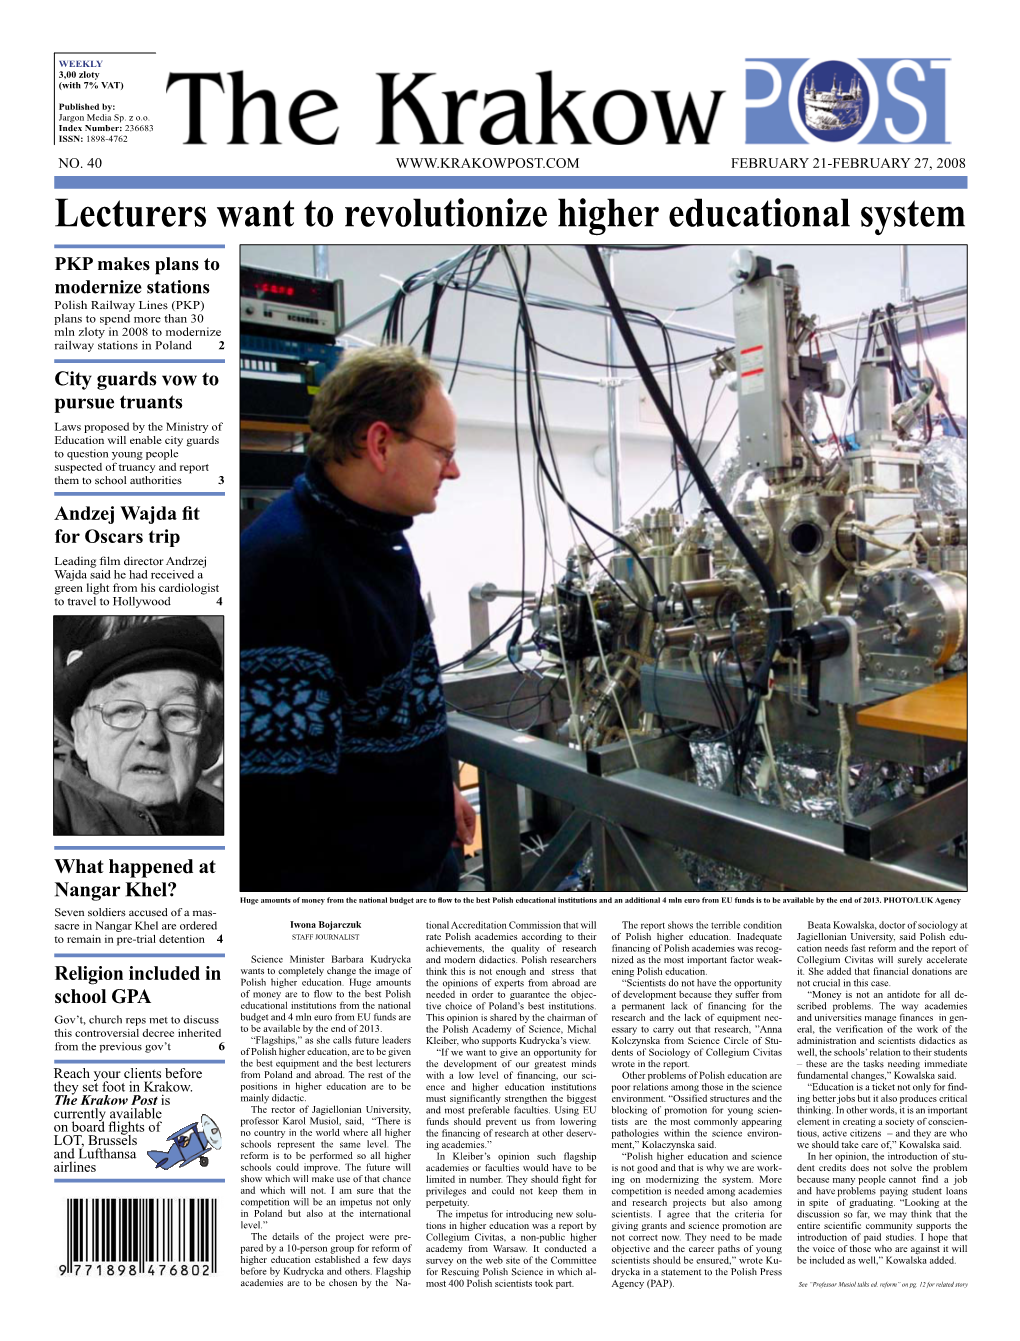 Lecturers Want to Revolutionize Higher Educational System